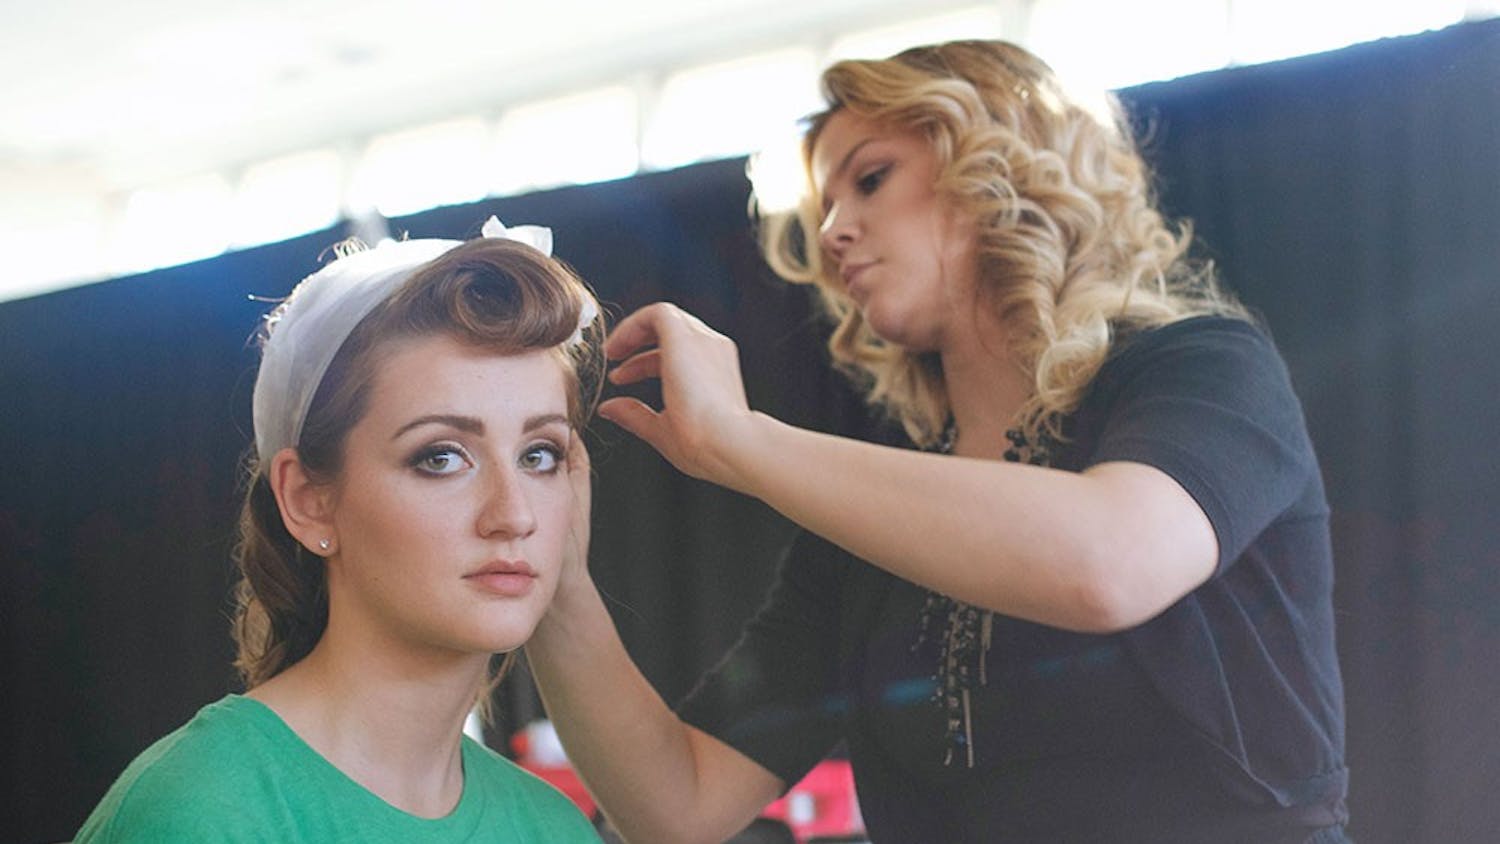 Amy Blake gets her hair done by a Paul Mitchell School Indianapolis hair stylist before walking in the Indiana University Fashion Show at the Indiana Memorial Union Alumni Hall. The fashion show was produced by Retail Studies Organization and showcased the designs of IU students earning a bachelors degree in Fashion Design.